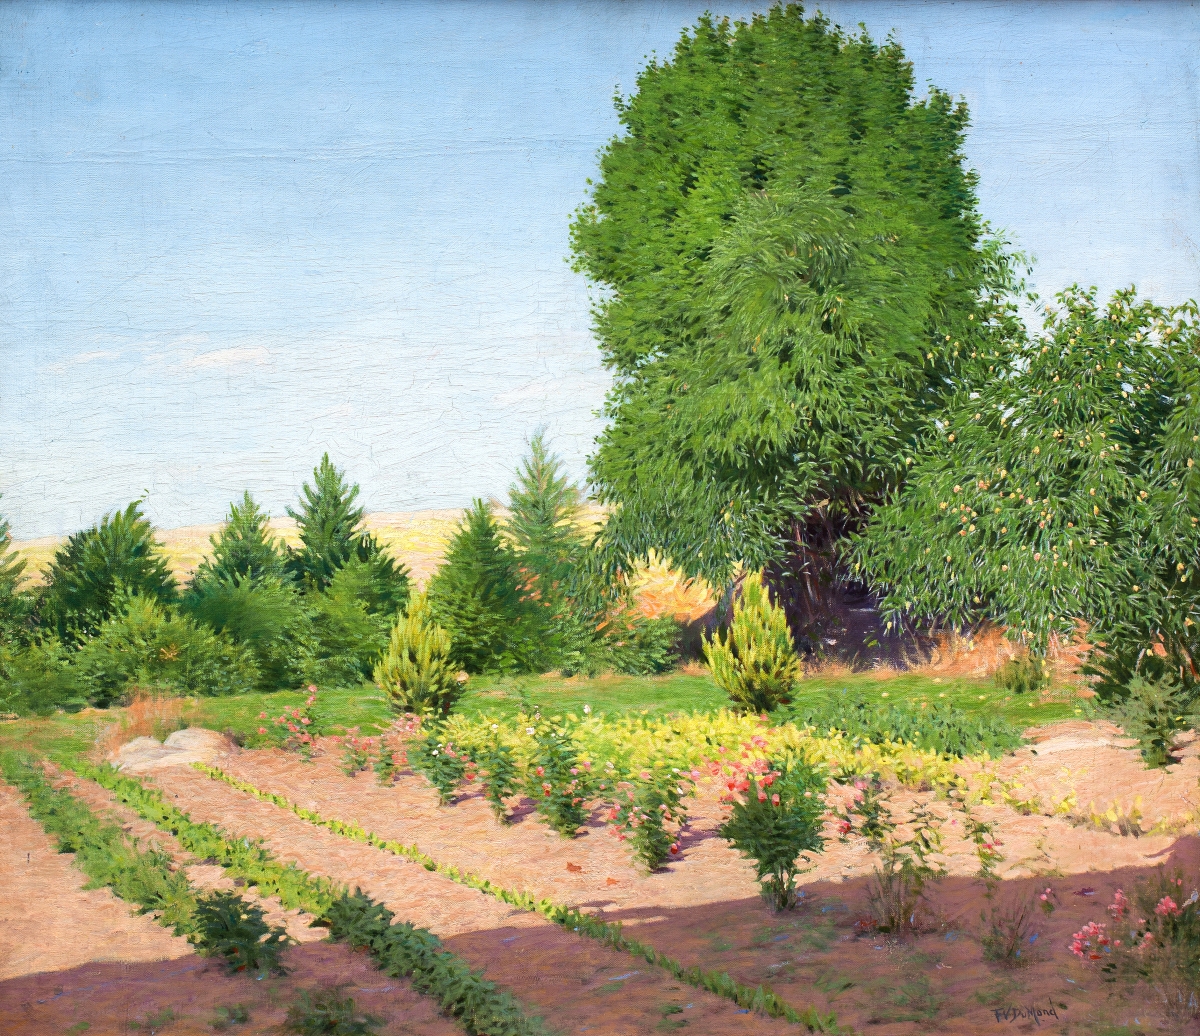 “Garden in Lyme” by Frank Vincent DuMond (American, 1865-1951), circa 1930. Oil on canvas. Collection of N. Robert Cestone & Stephen V. DeLange.